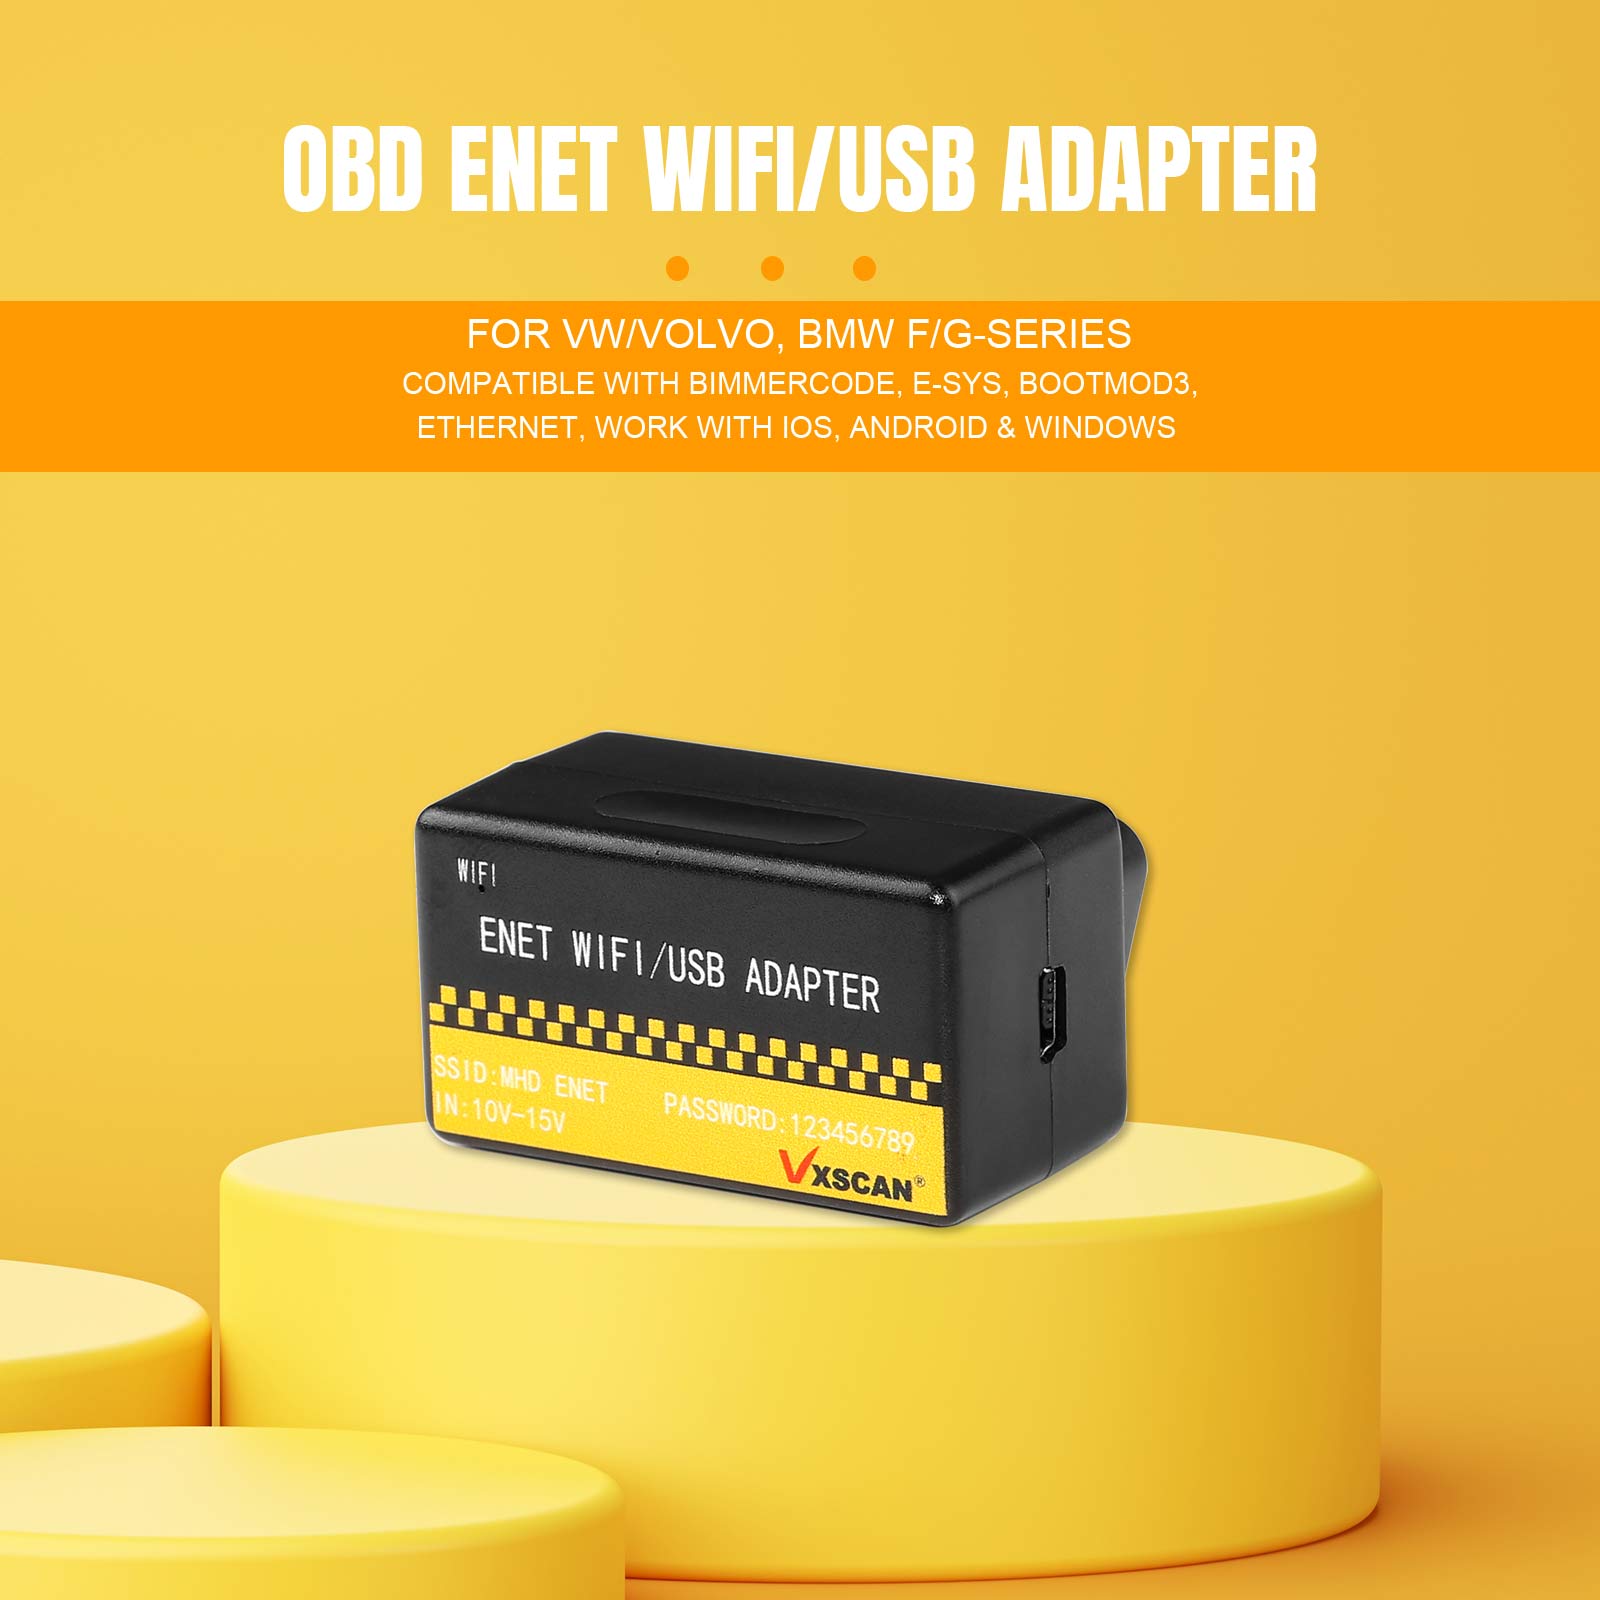 OBD ENET WIFI/USB Adapter For BMW/VW/VOLVO for App ISTA Xentry